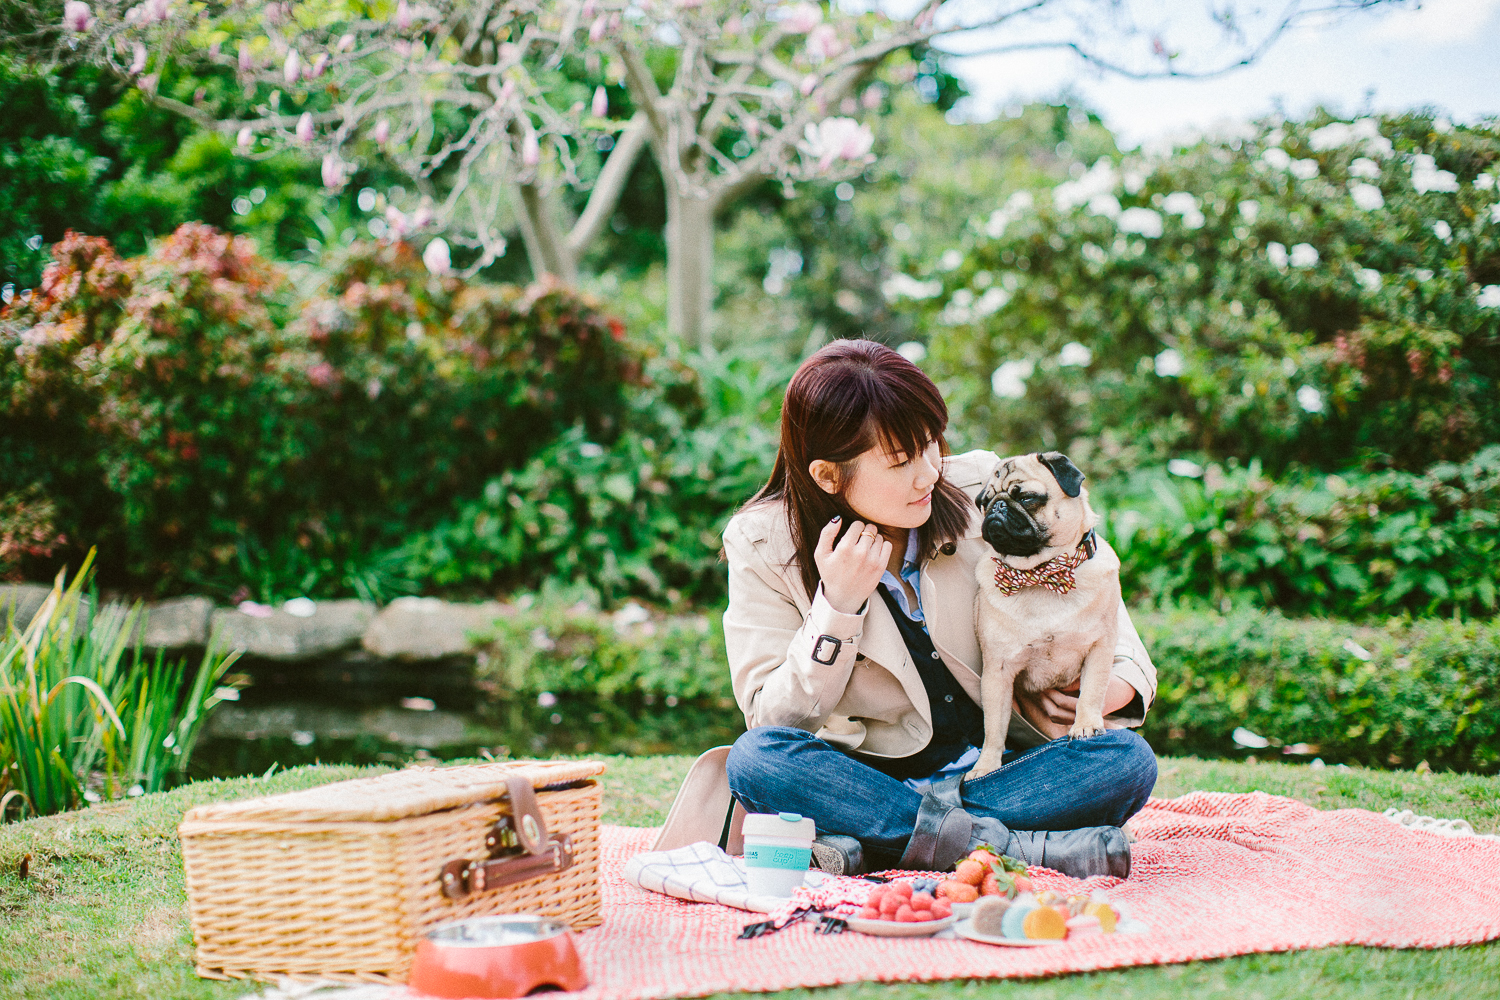 twoguineapigs_pet_photography_oh_jaffa_picnic_pugs_1500-9.jpg